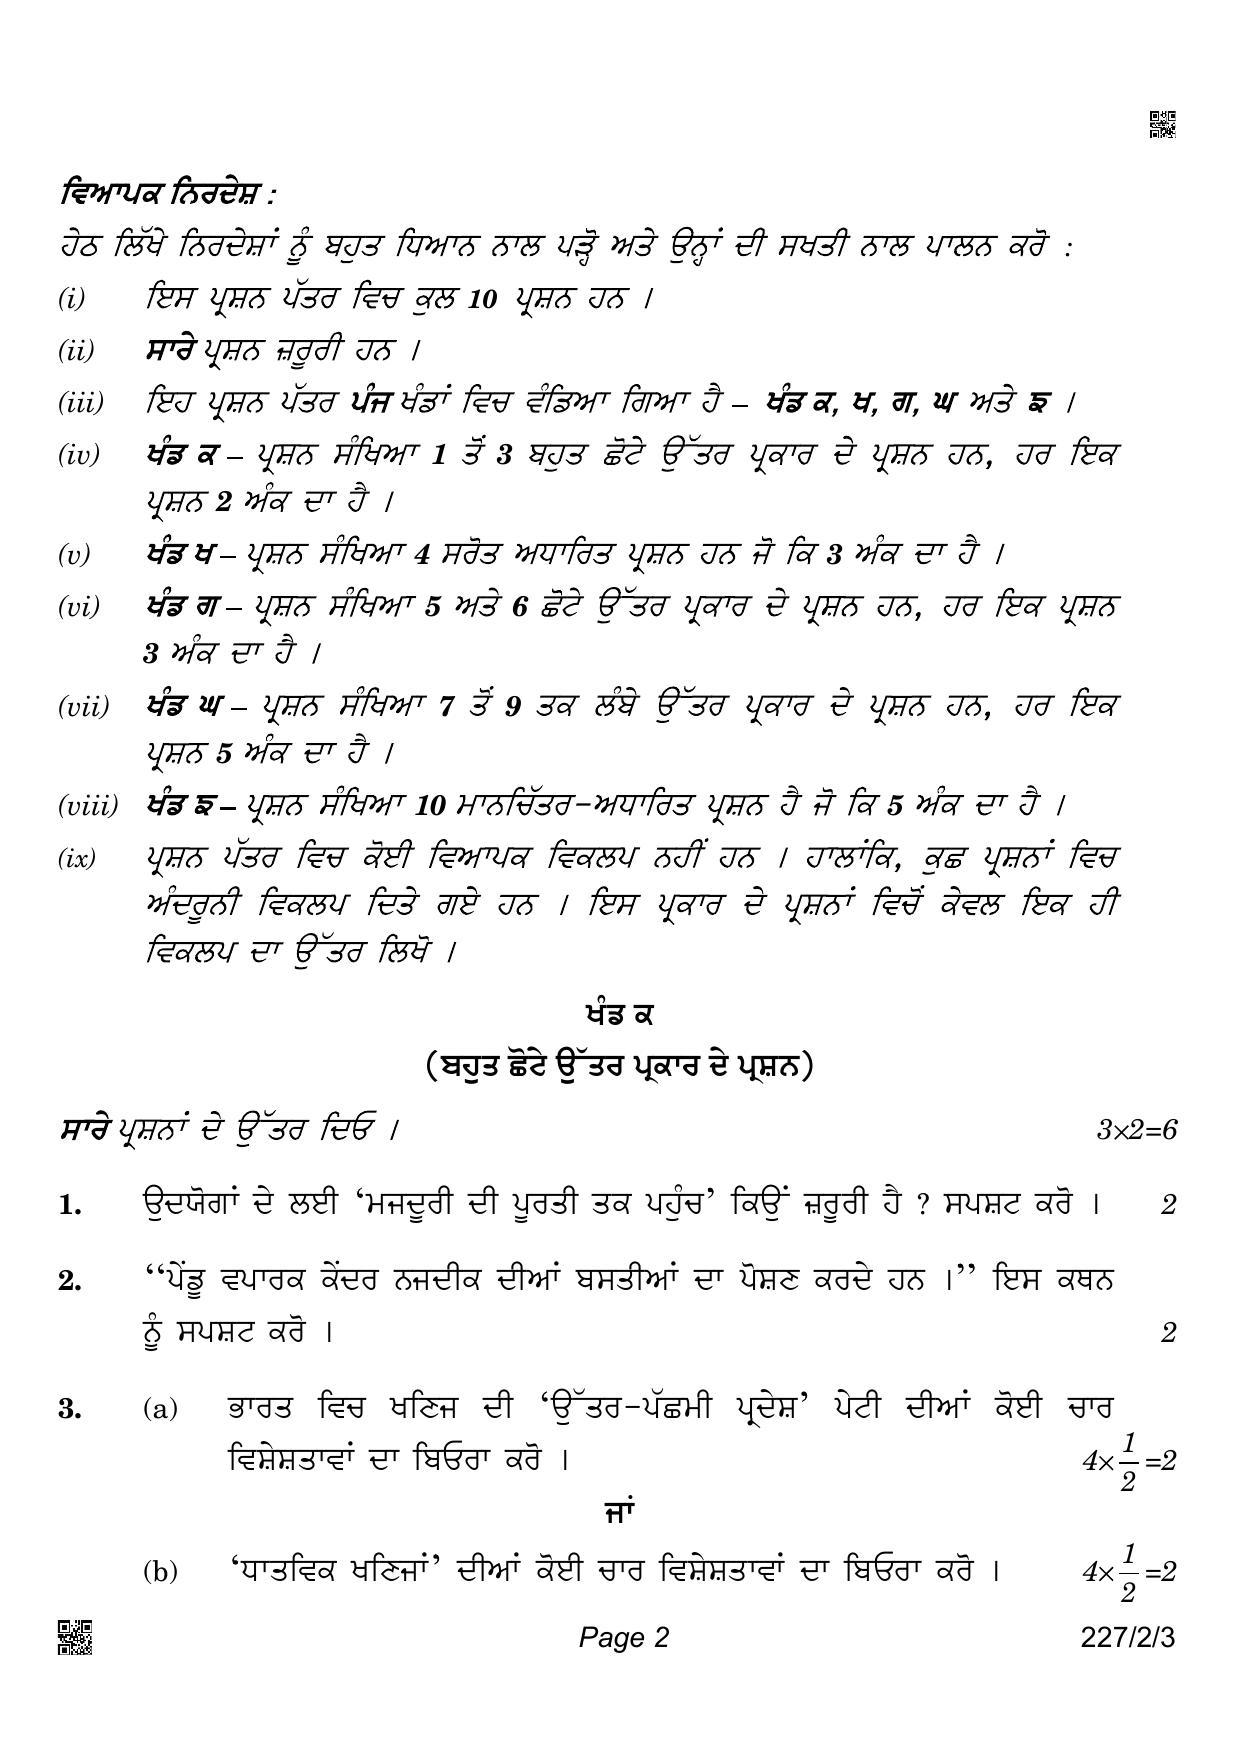 CBSE Class 12 227-2-3 Geography  Punjabi Version 2022 Question Paper - Page 2